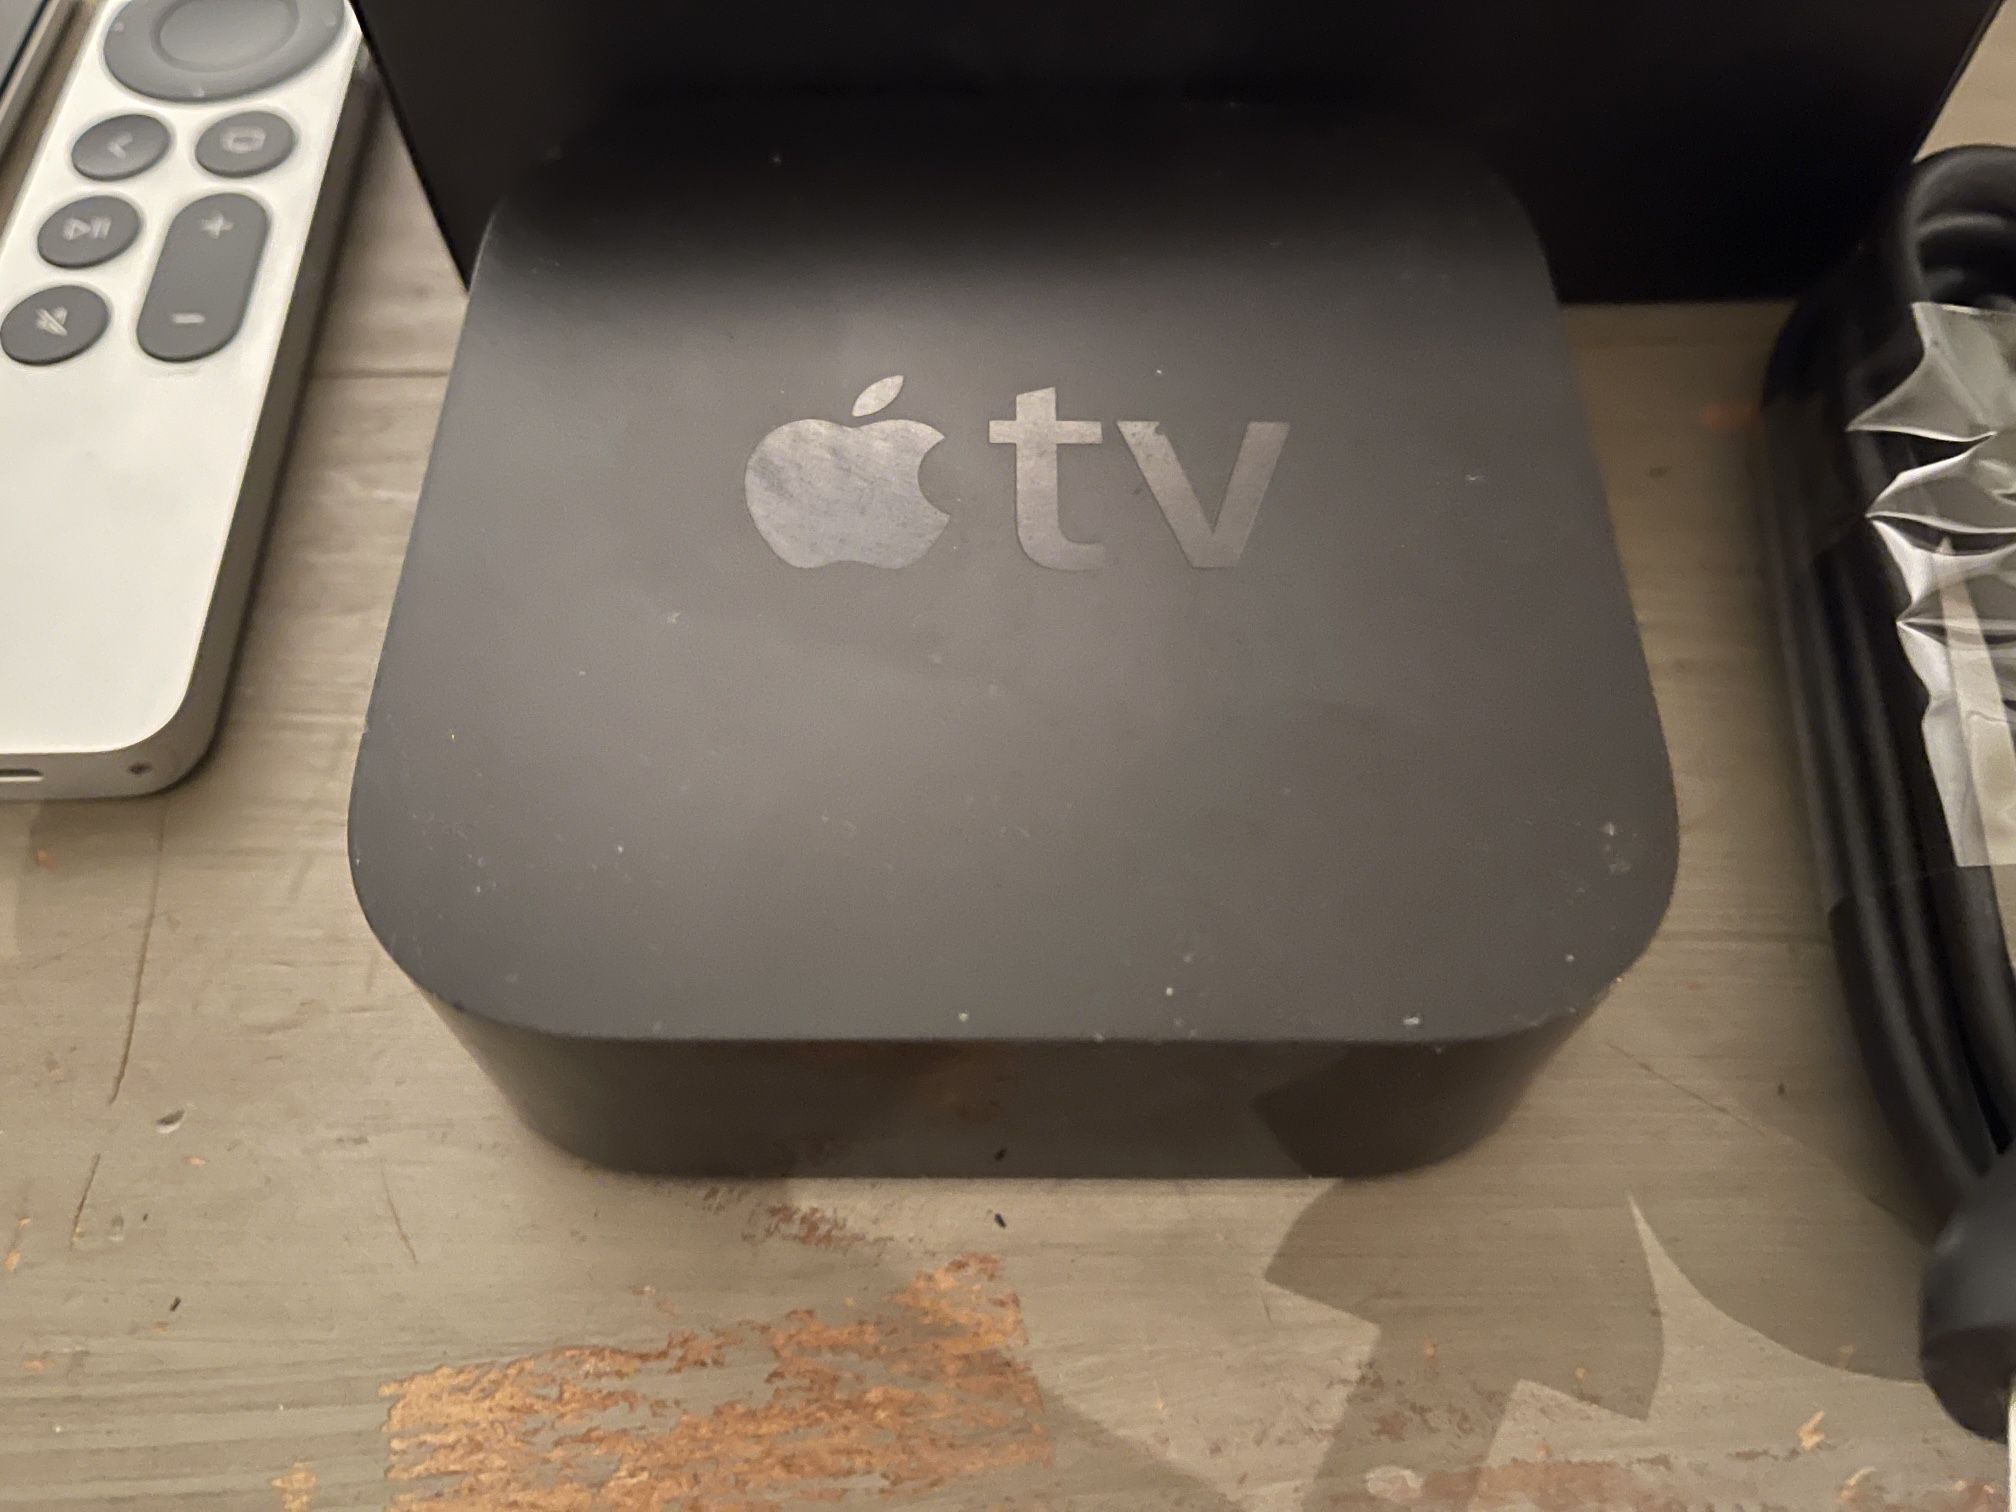 Apple TV 4th Gen (MGY52LL/A) With New Siri Remote